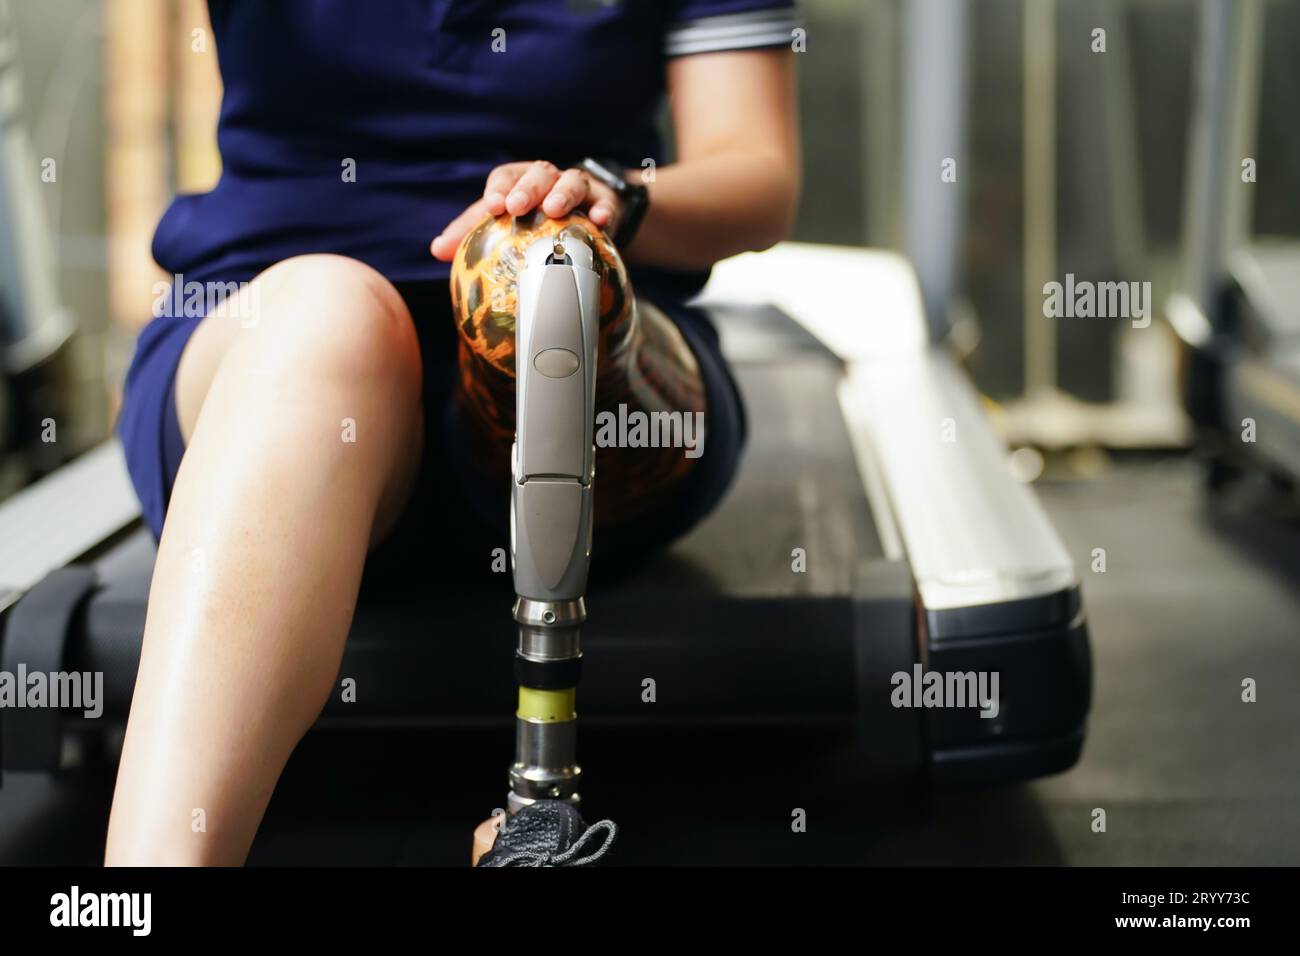 Young female with one prosthetic leg with the practice of using prosthetic legs to walk, exercise and and daily activities Stock Photo